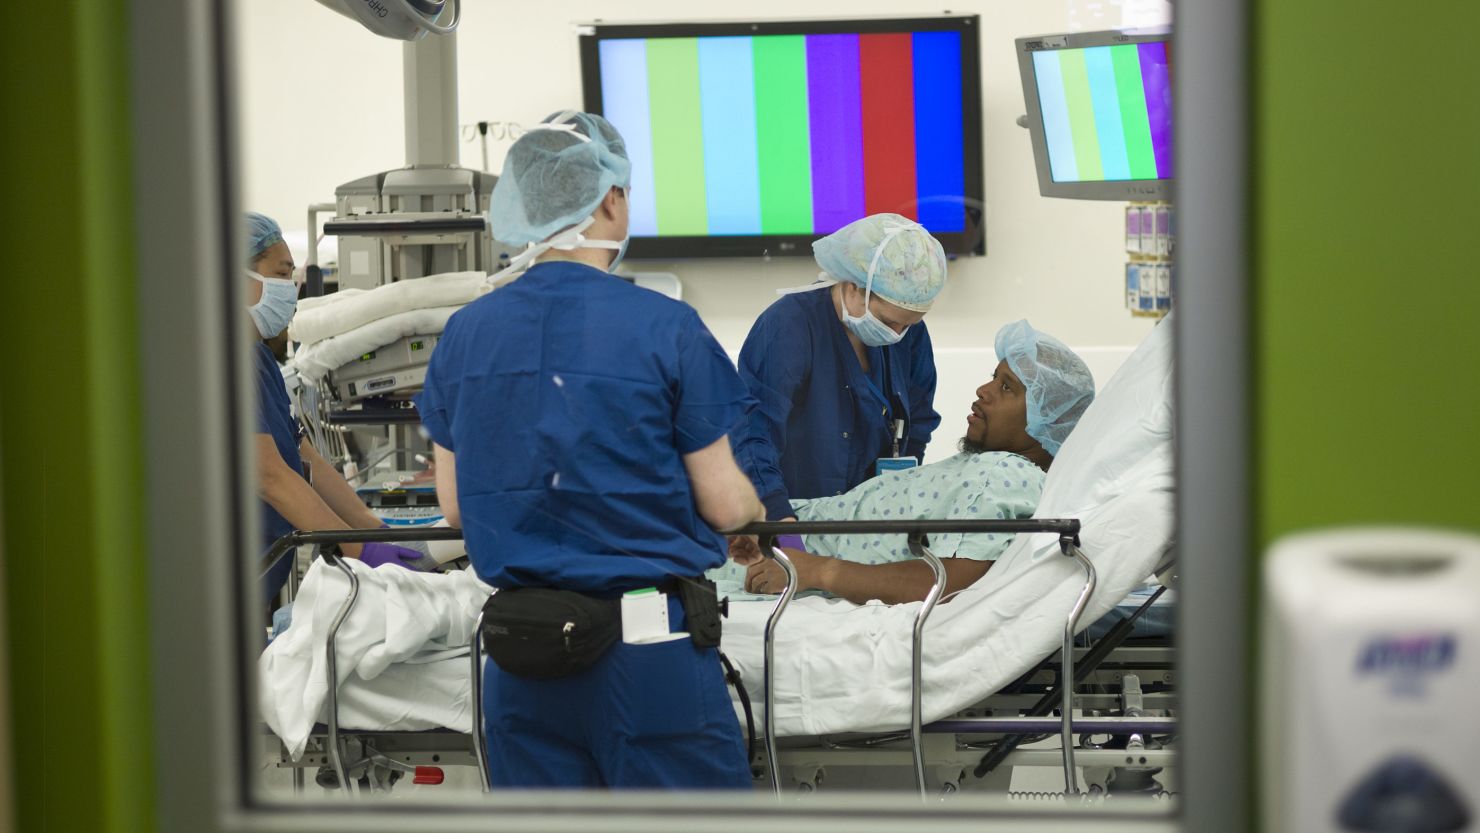 A kidney donor is prepared in an operating room before a kidney transplant at Johns Hopkins Hospital in Baltimore, Maryland. 
